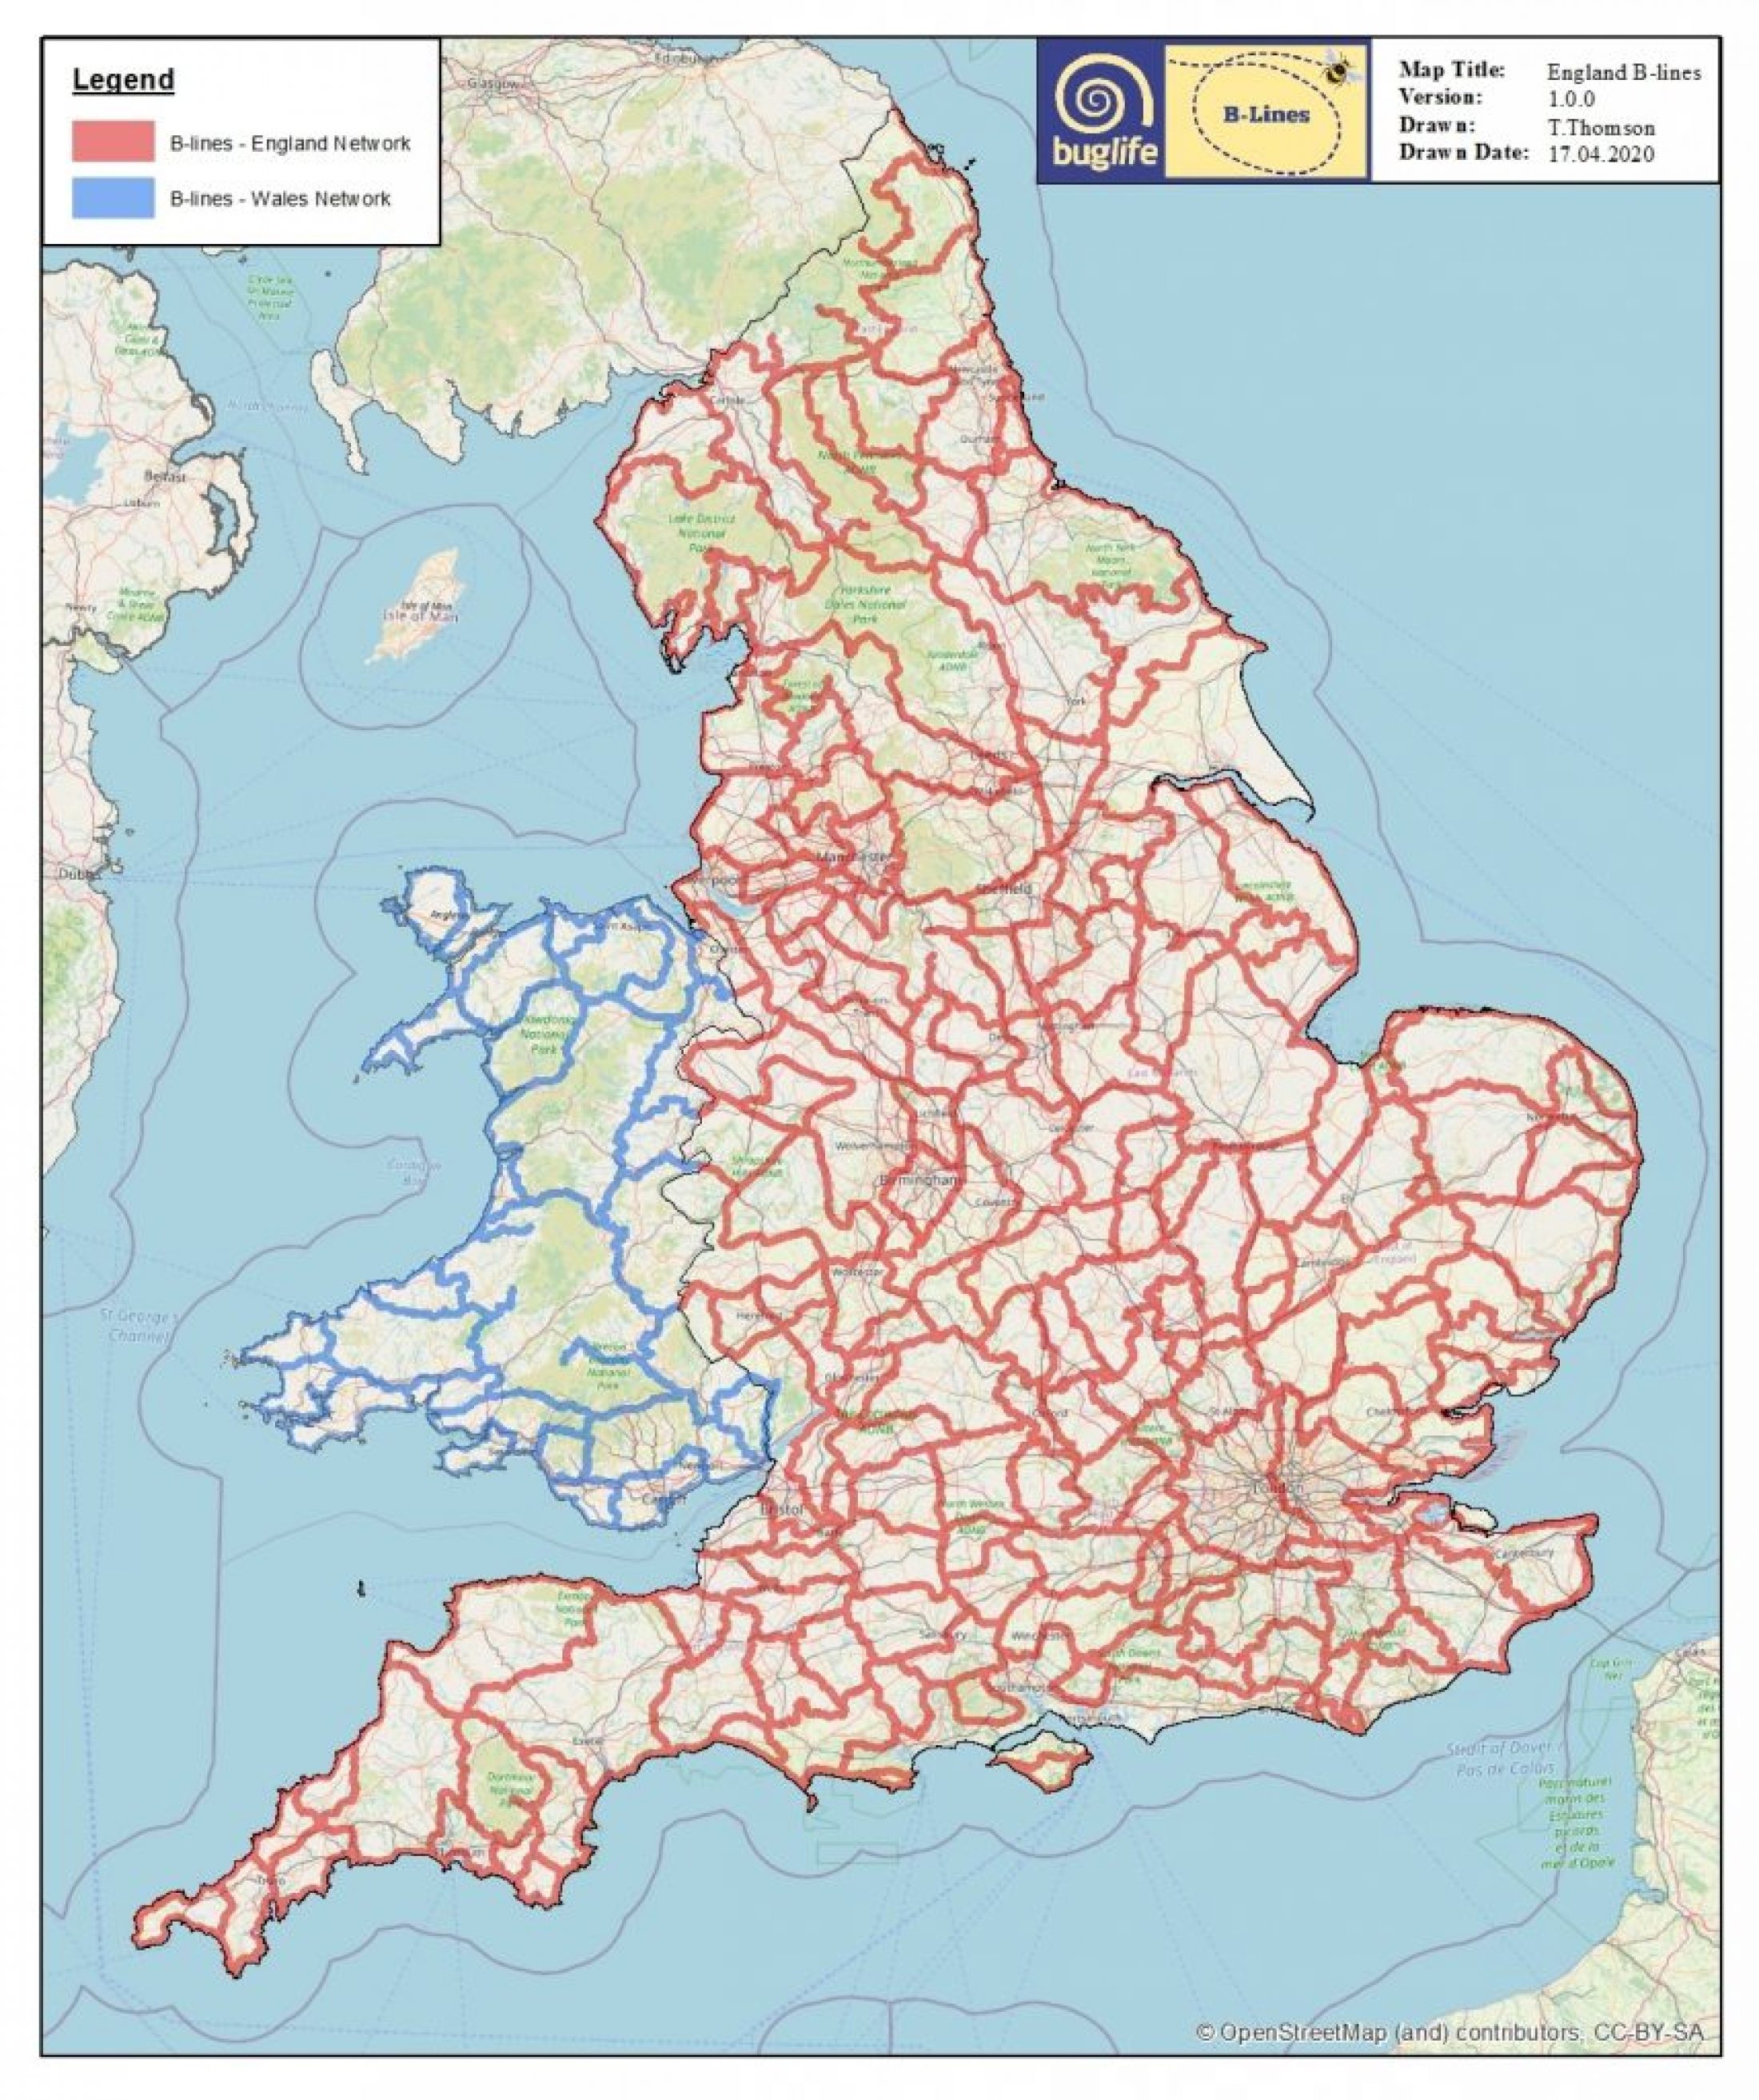 B-Lines mapping is now complete for Wales, Northern Ireland, and England; the Scotland map will also be completed by the end of the year.